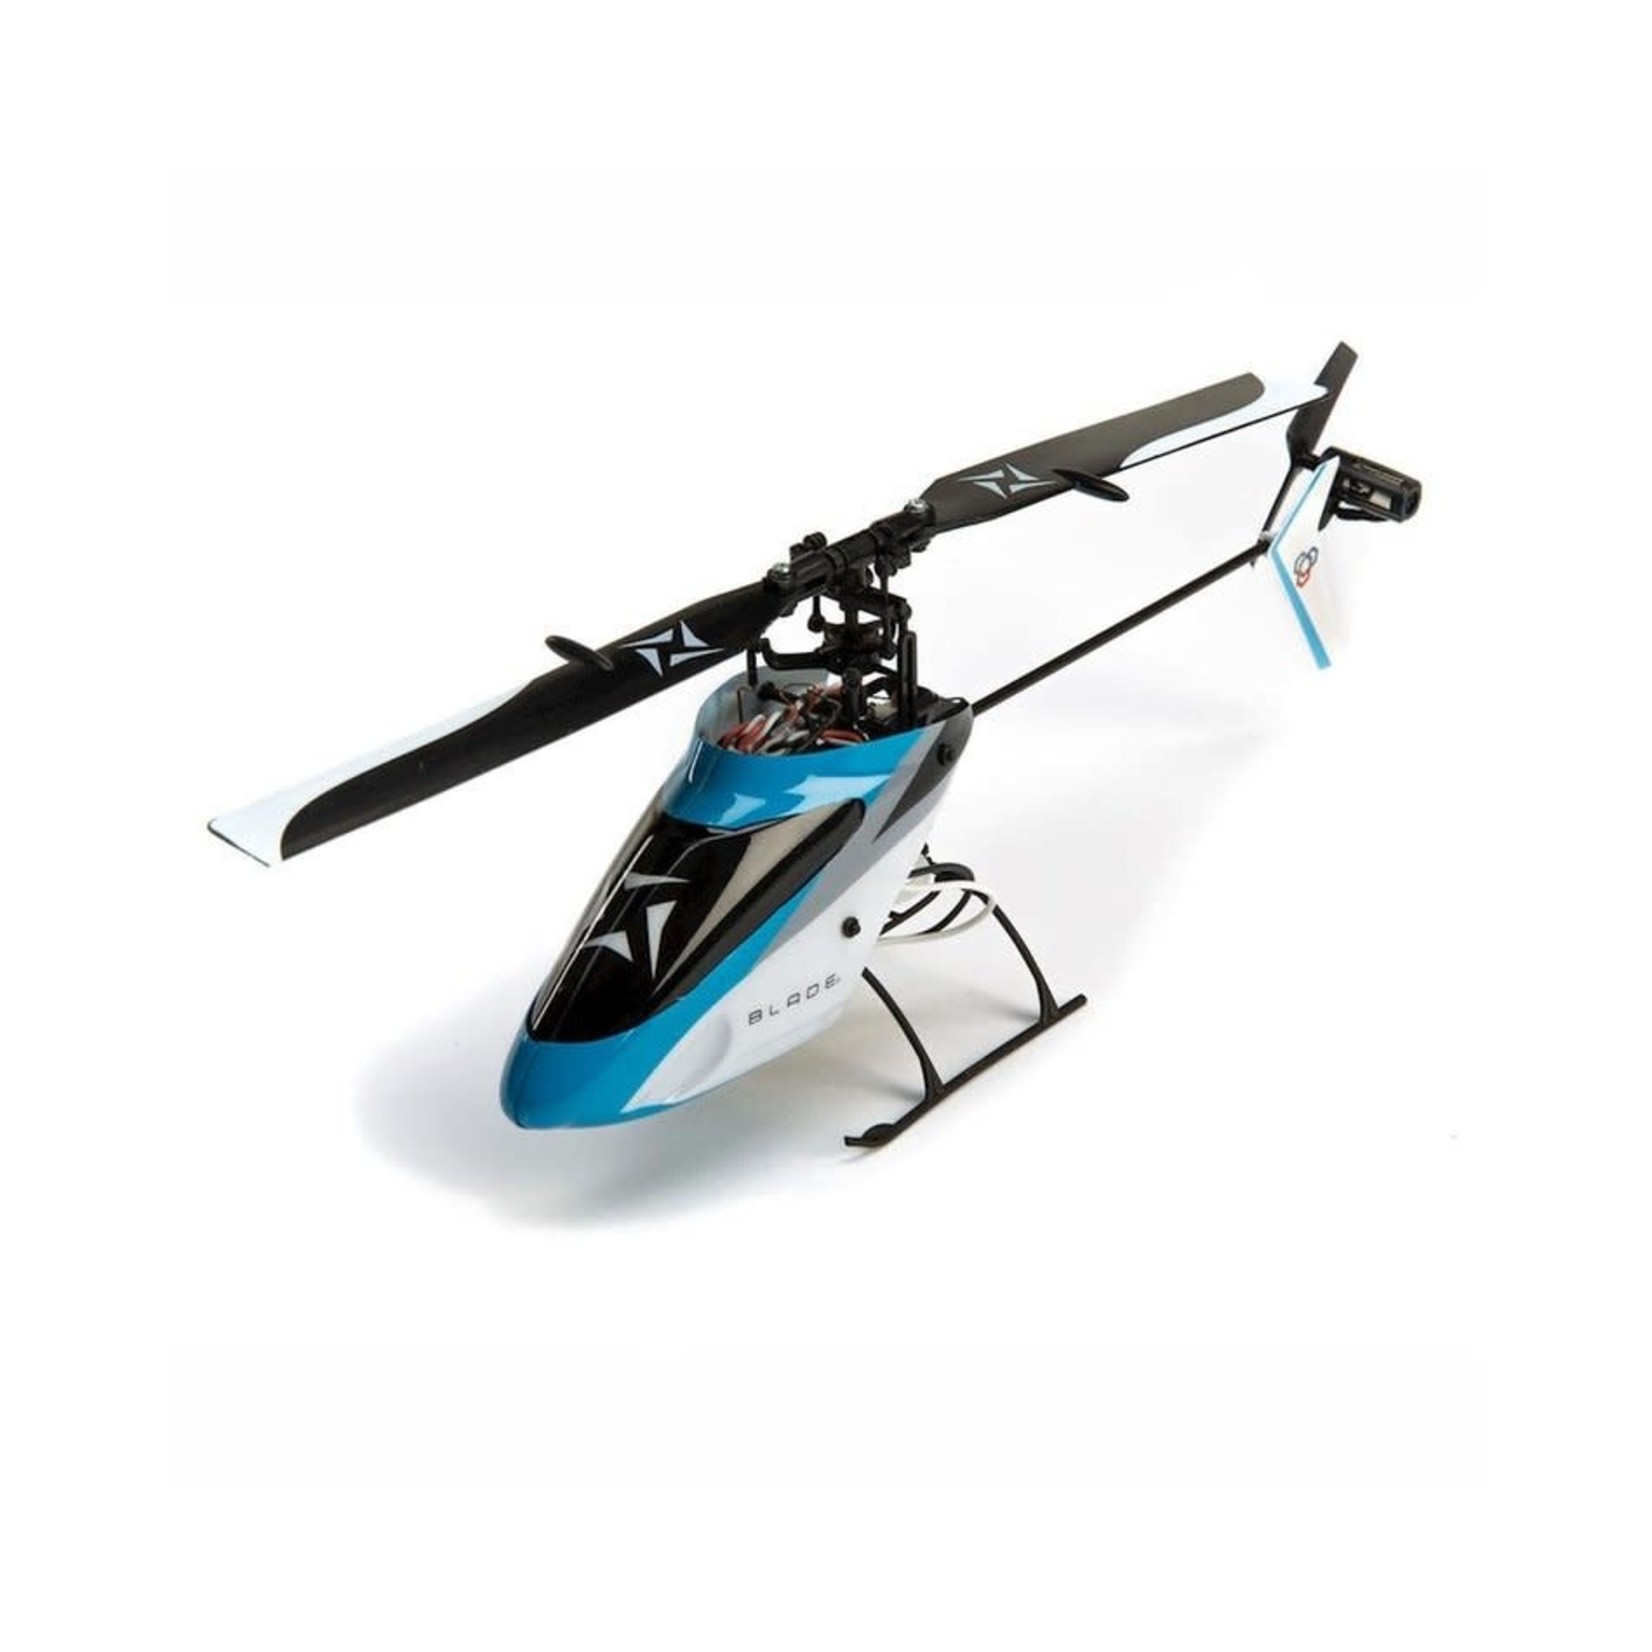 Blade Blade Nano S3 RTF Flybarless Electric Helicopter w/SAFE, 2.4GHz Radio, Battery & Charger #BLH01300